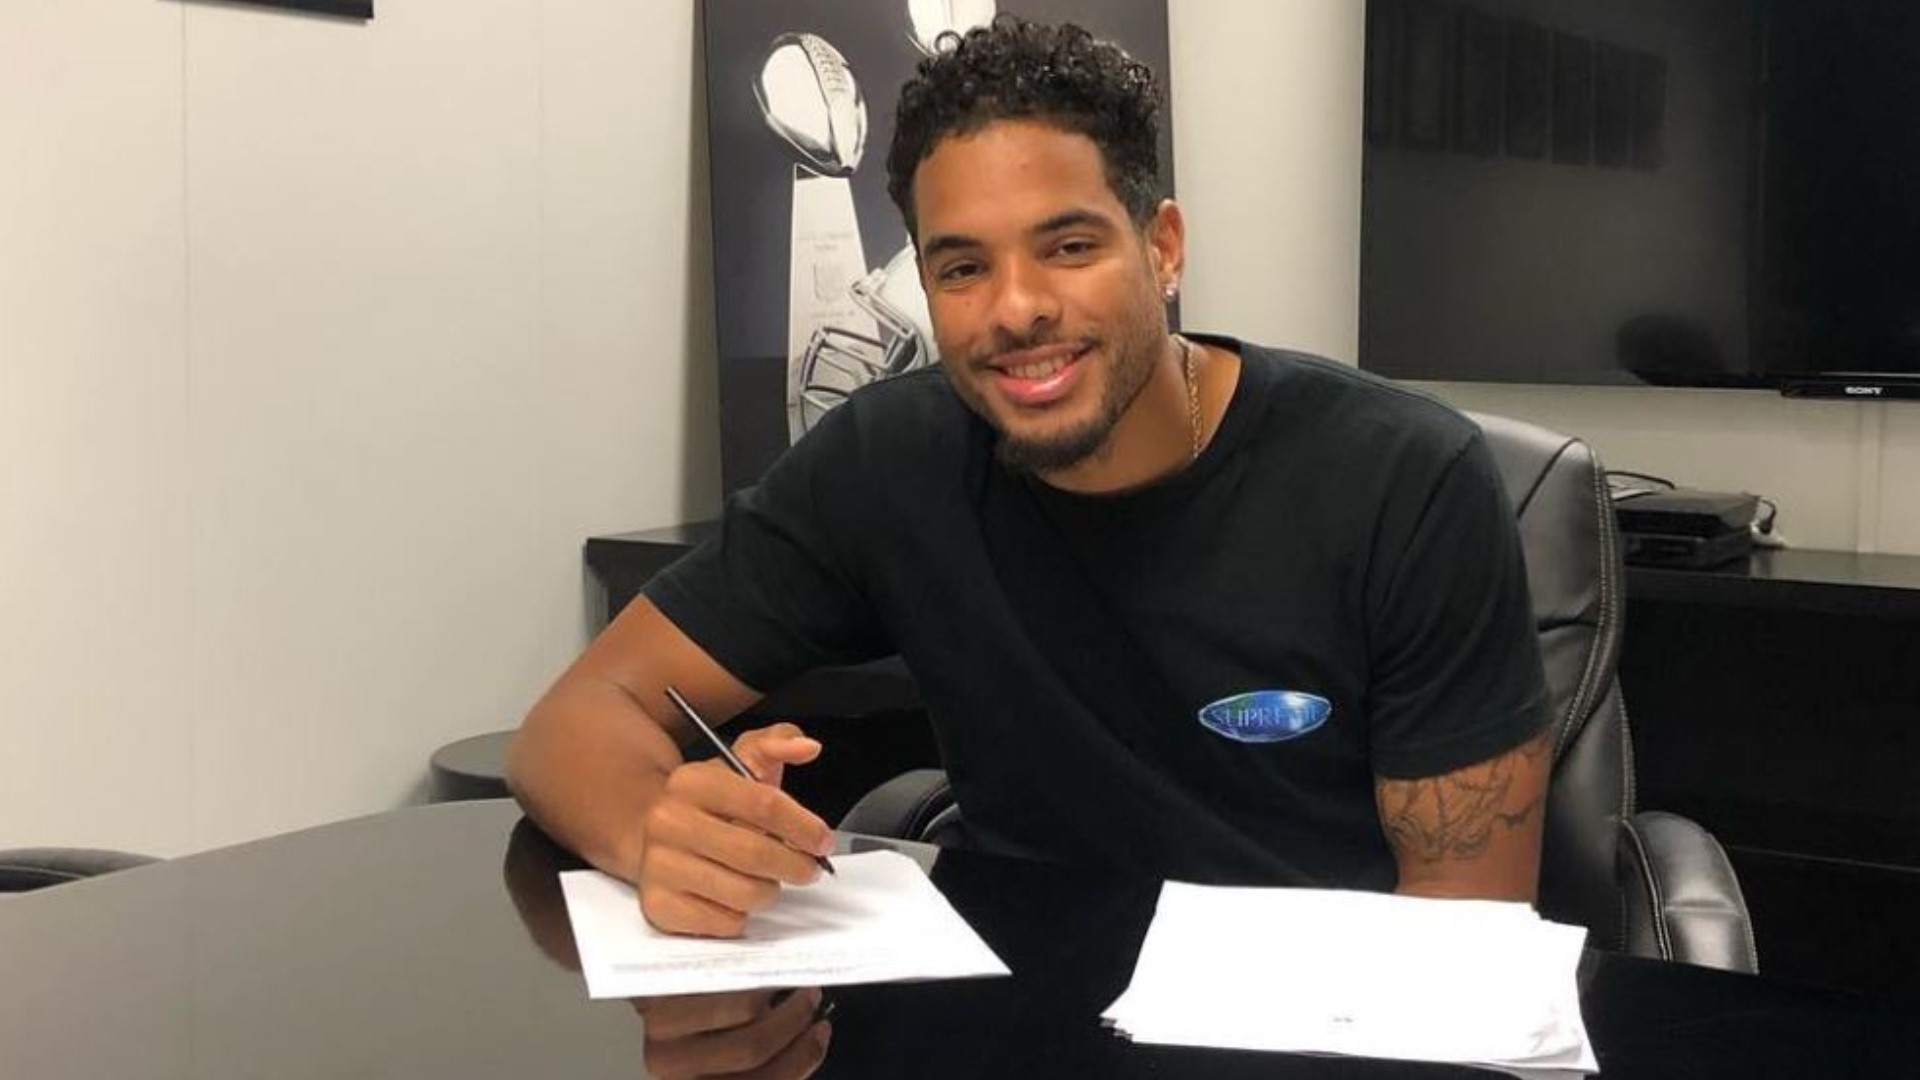 It's been a whirlwind two weeks for rookie Raiders wide receiver Keelan Doss. After being cut by Oakland earlier this month, the Alameda native was then signed to the Jacksonville Jaguars practice squad. But in a turn of events, the UC Davis product got the opportunity to be on the Raiders' 53-man roster the day before the team's season opener.